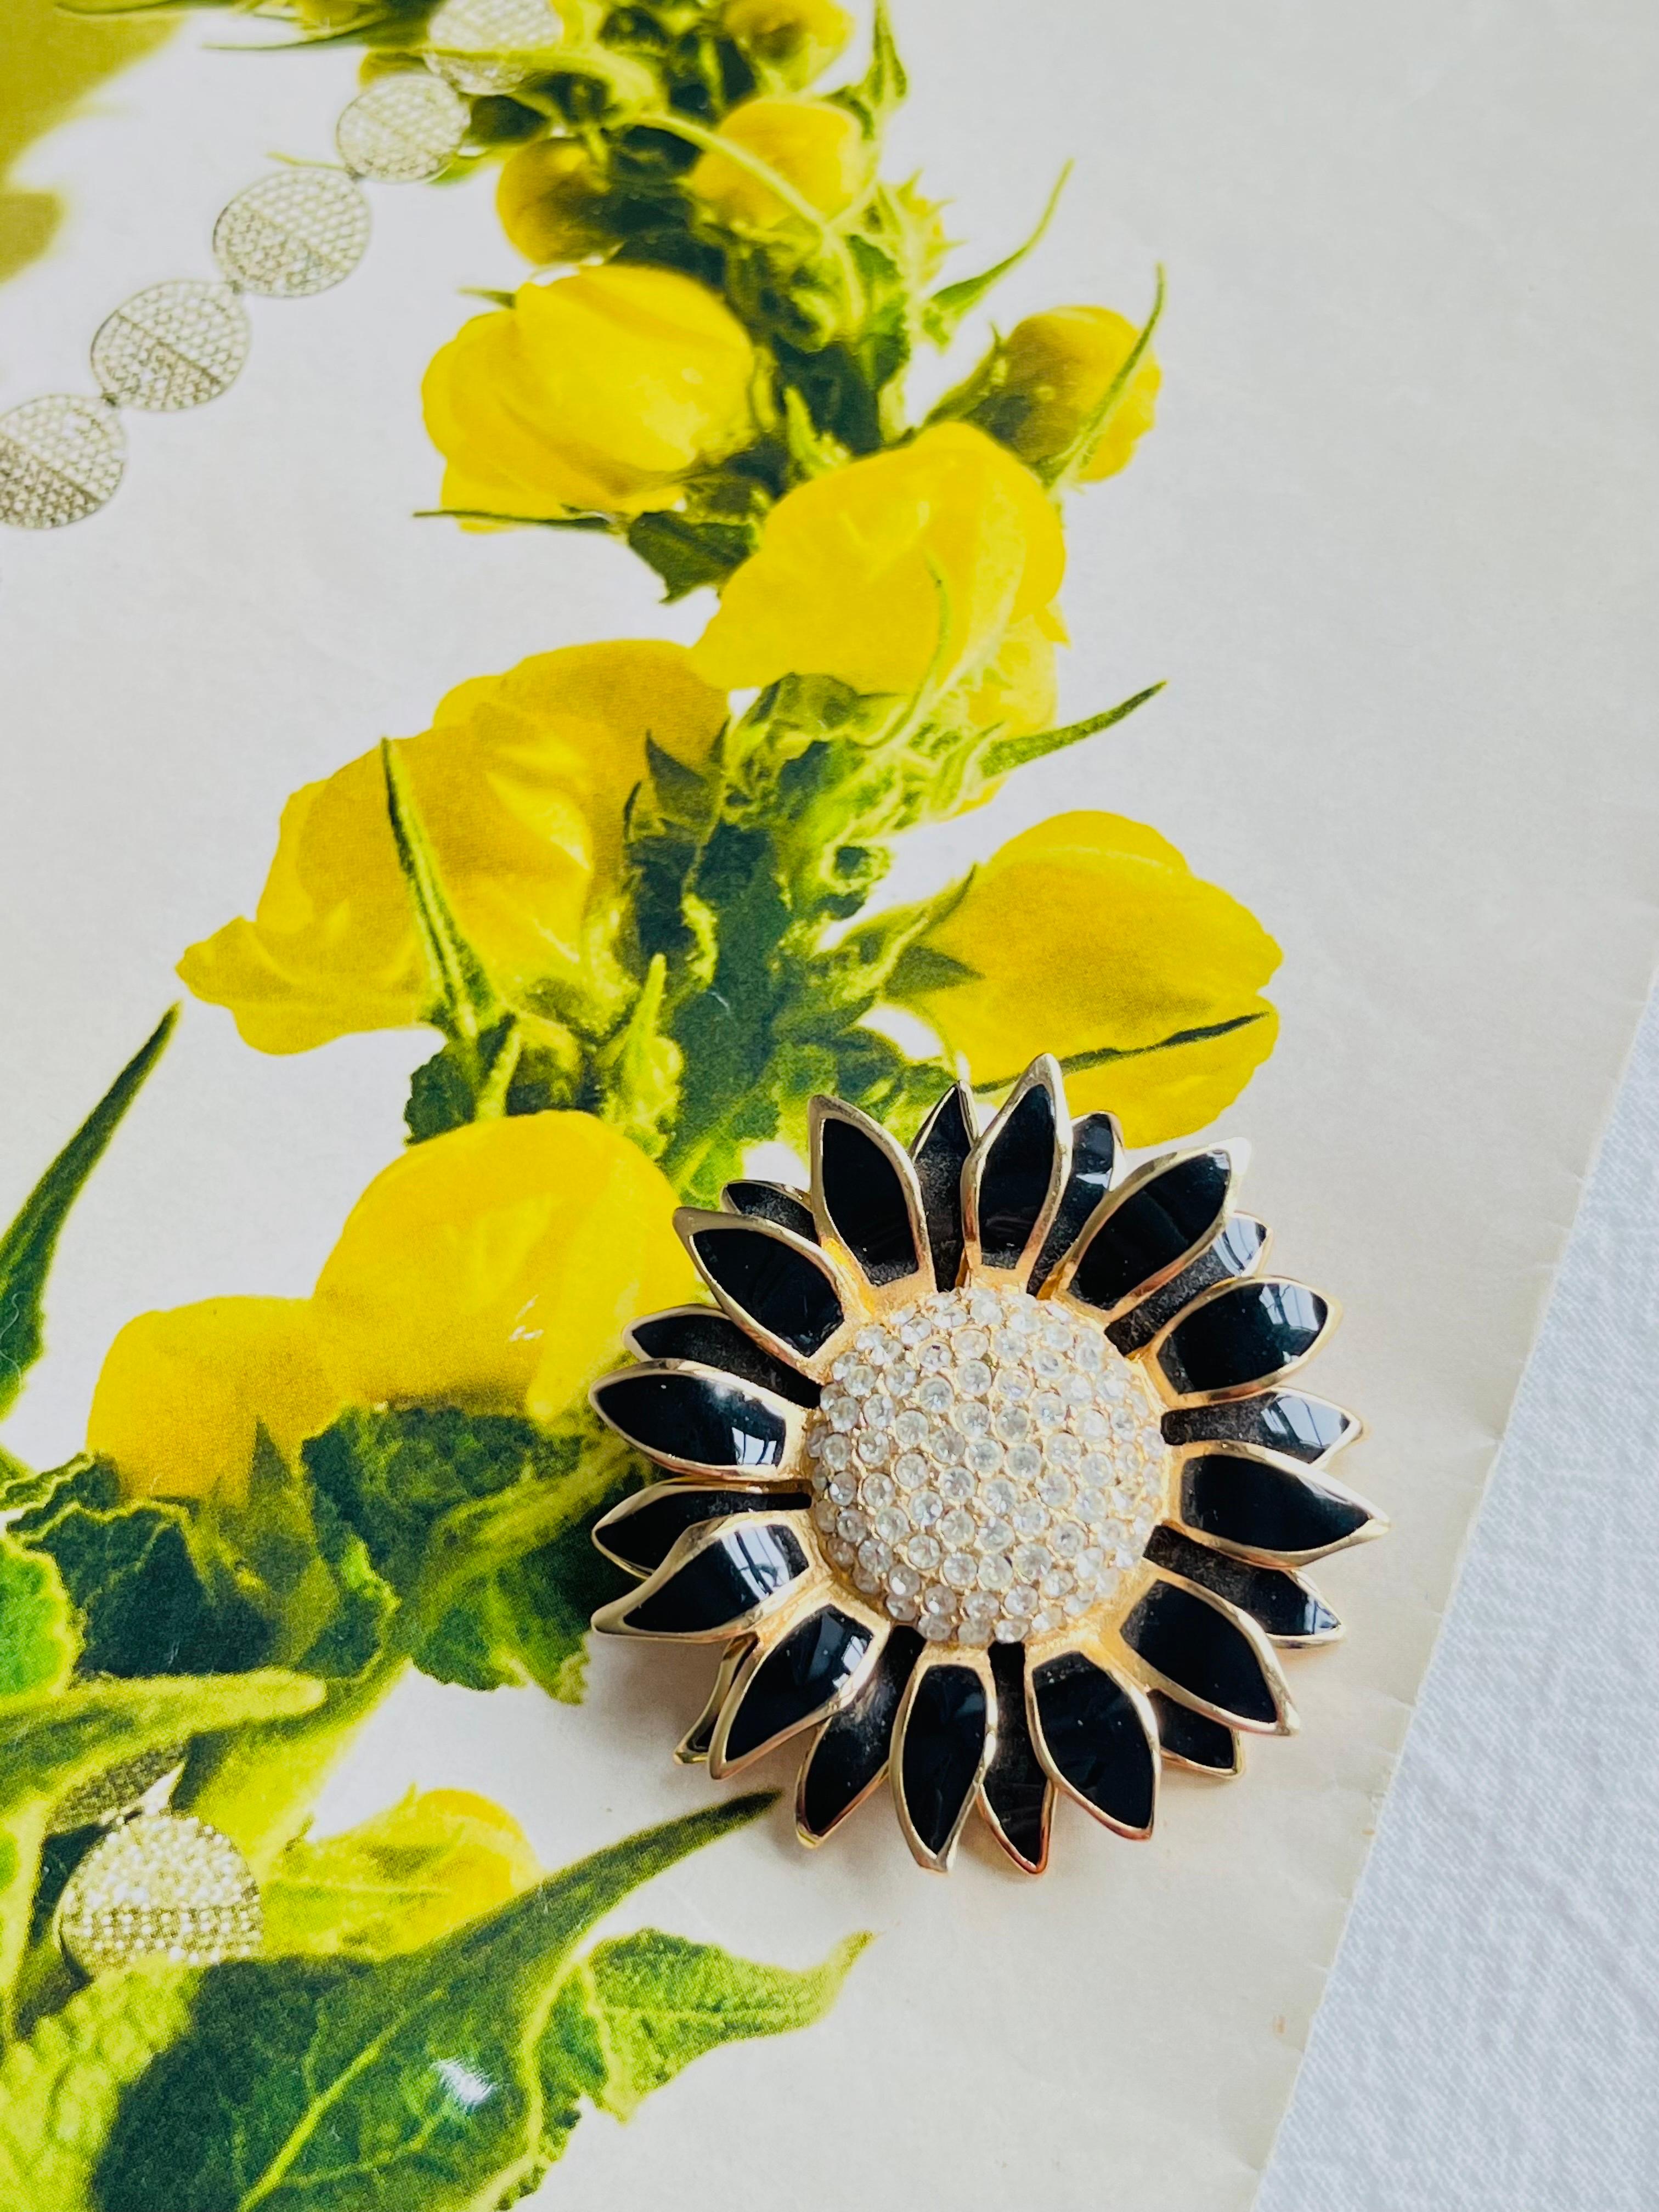 Christian Dior Vintage 1980s Crystals Black Petal Sunflower Double Layer Brooch, Gold Tone

Very excellent condition. Rare to find. Signed at back. 100% genuine.

Size: 4.5*4.5 cm.

Weight: 24.0 g.
_ _ _

Great for everyday wear. Come with velvet